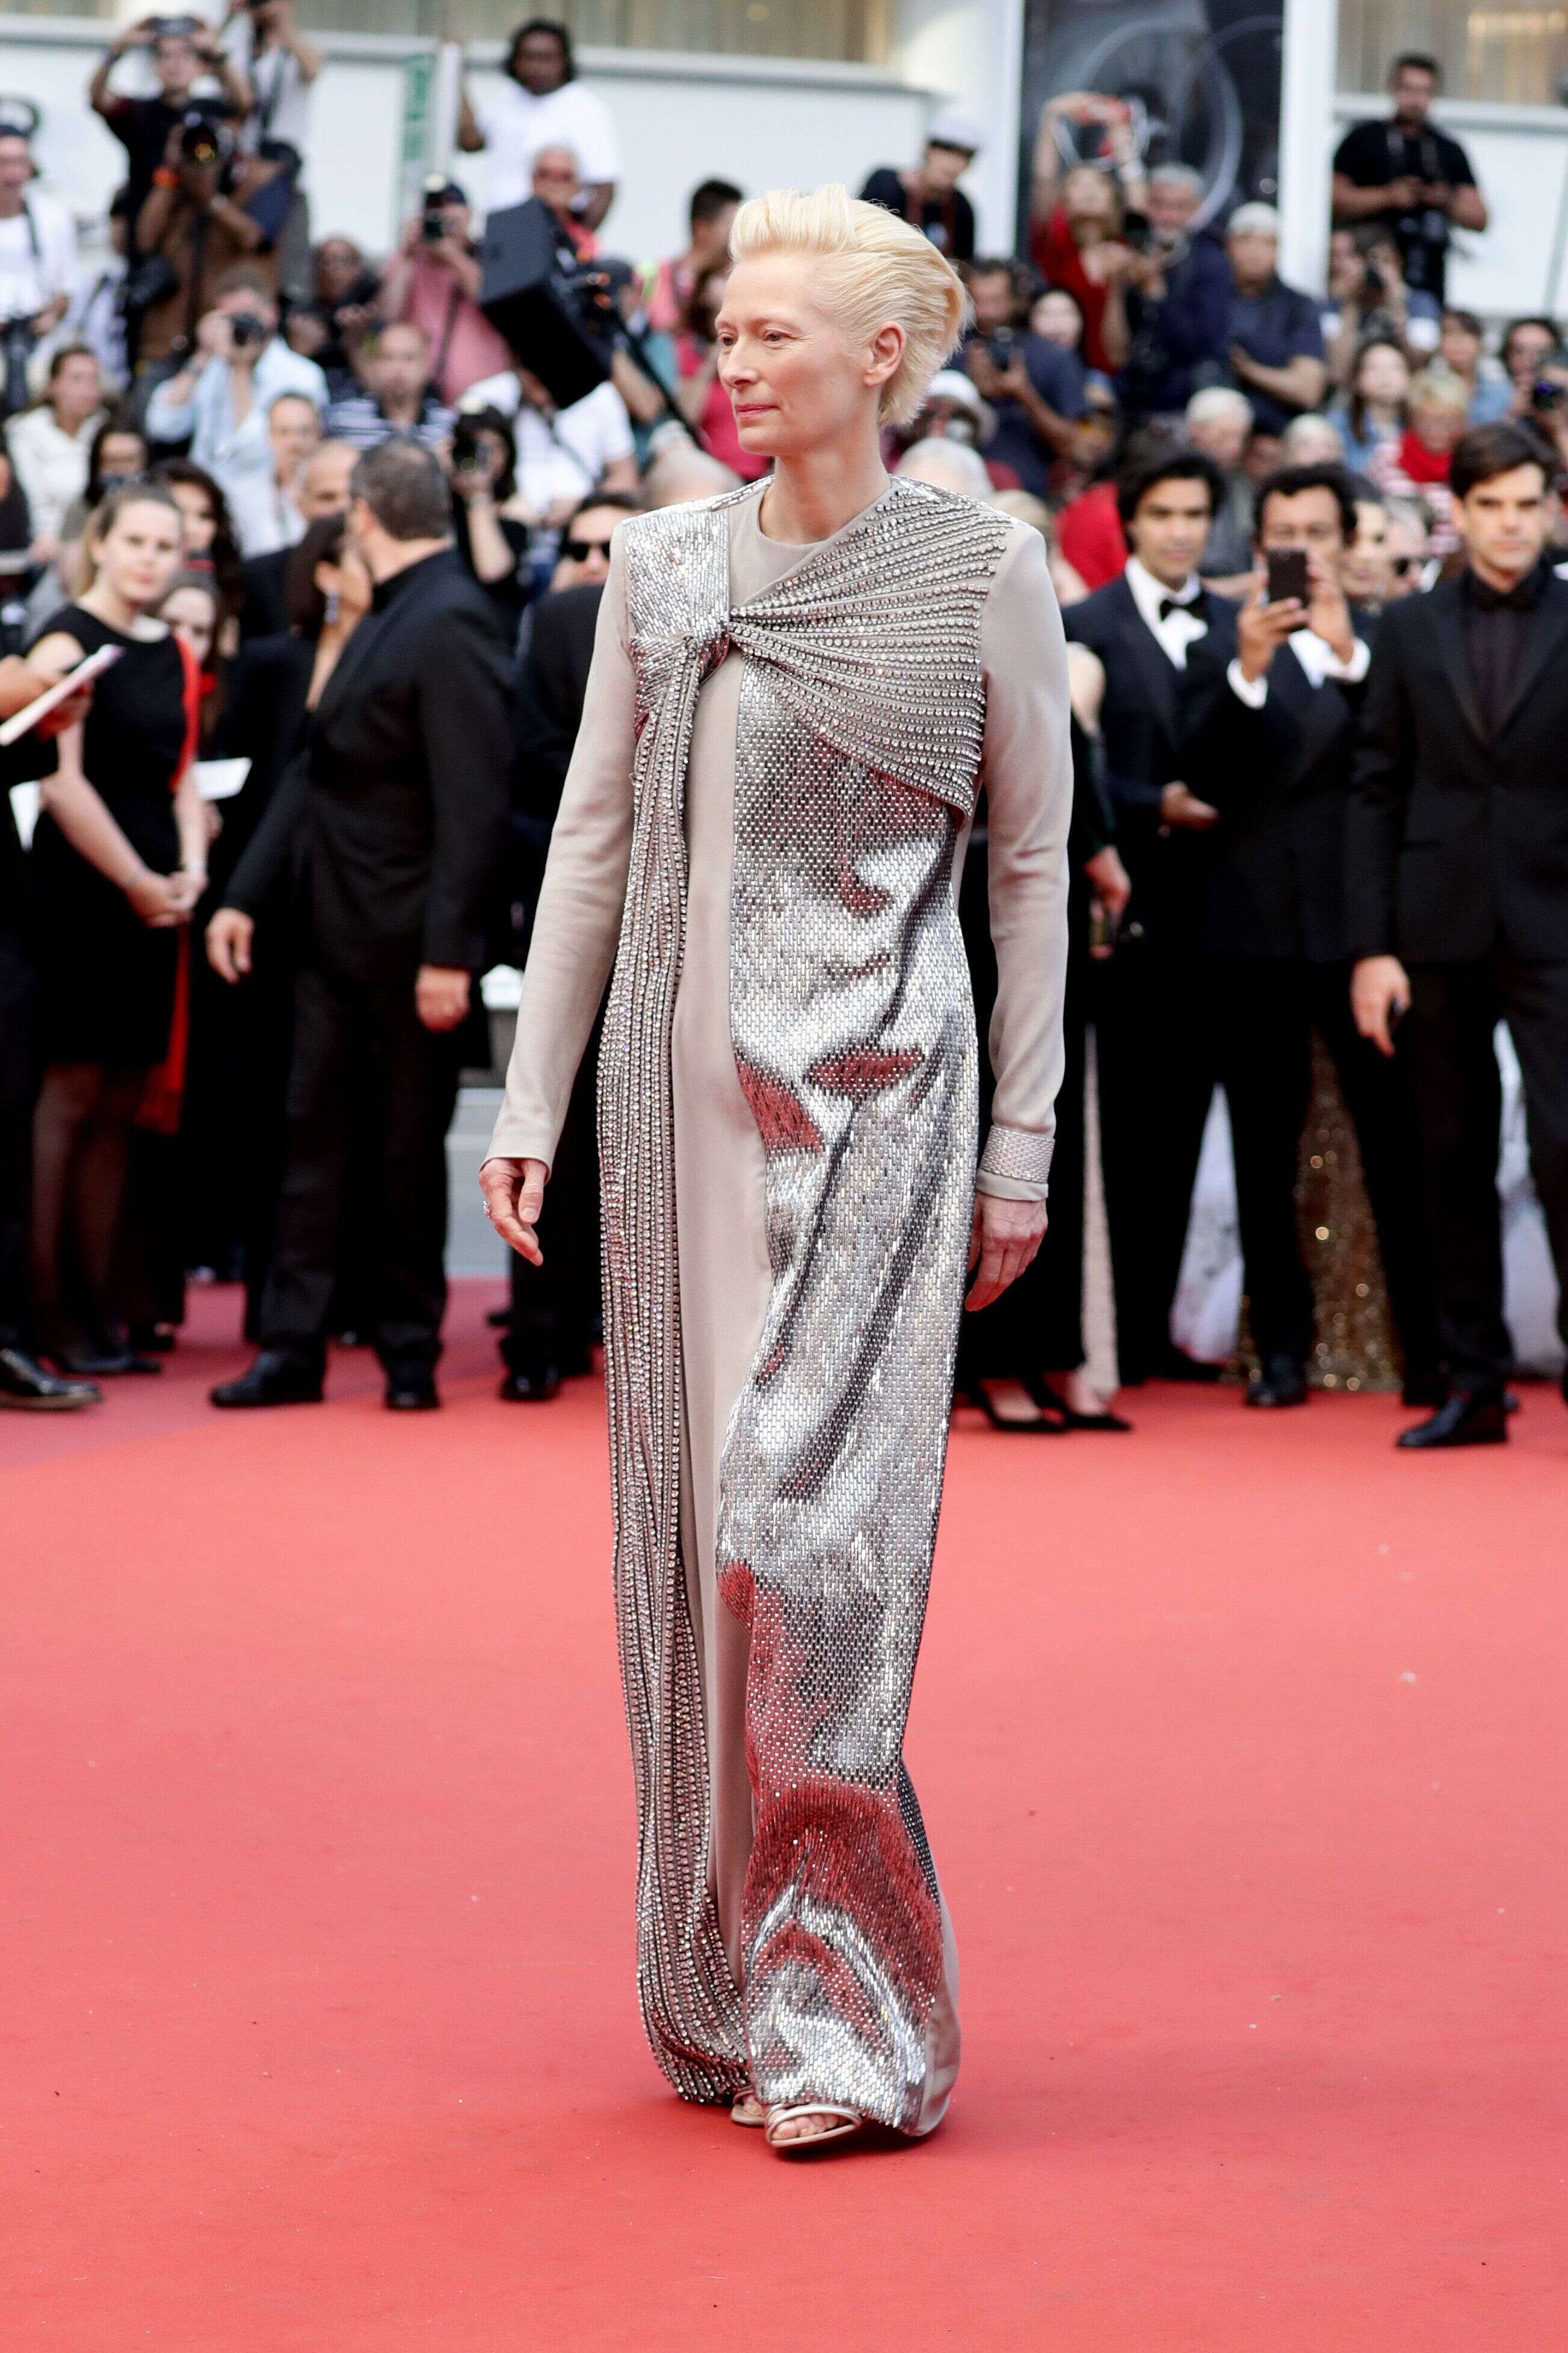 CANNES, FRANCE - MAY 14: Tilda Swintonattends the opening ceremony and screening of 